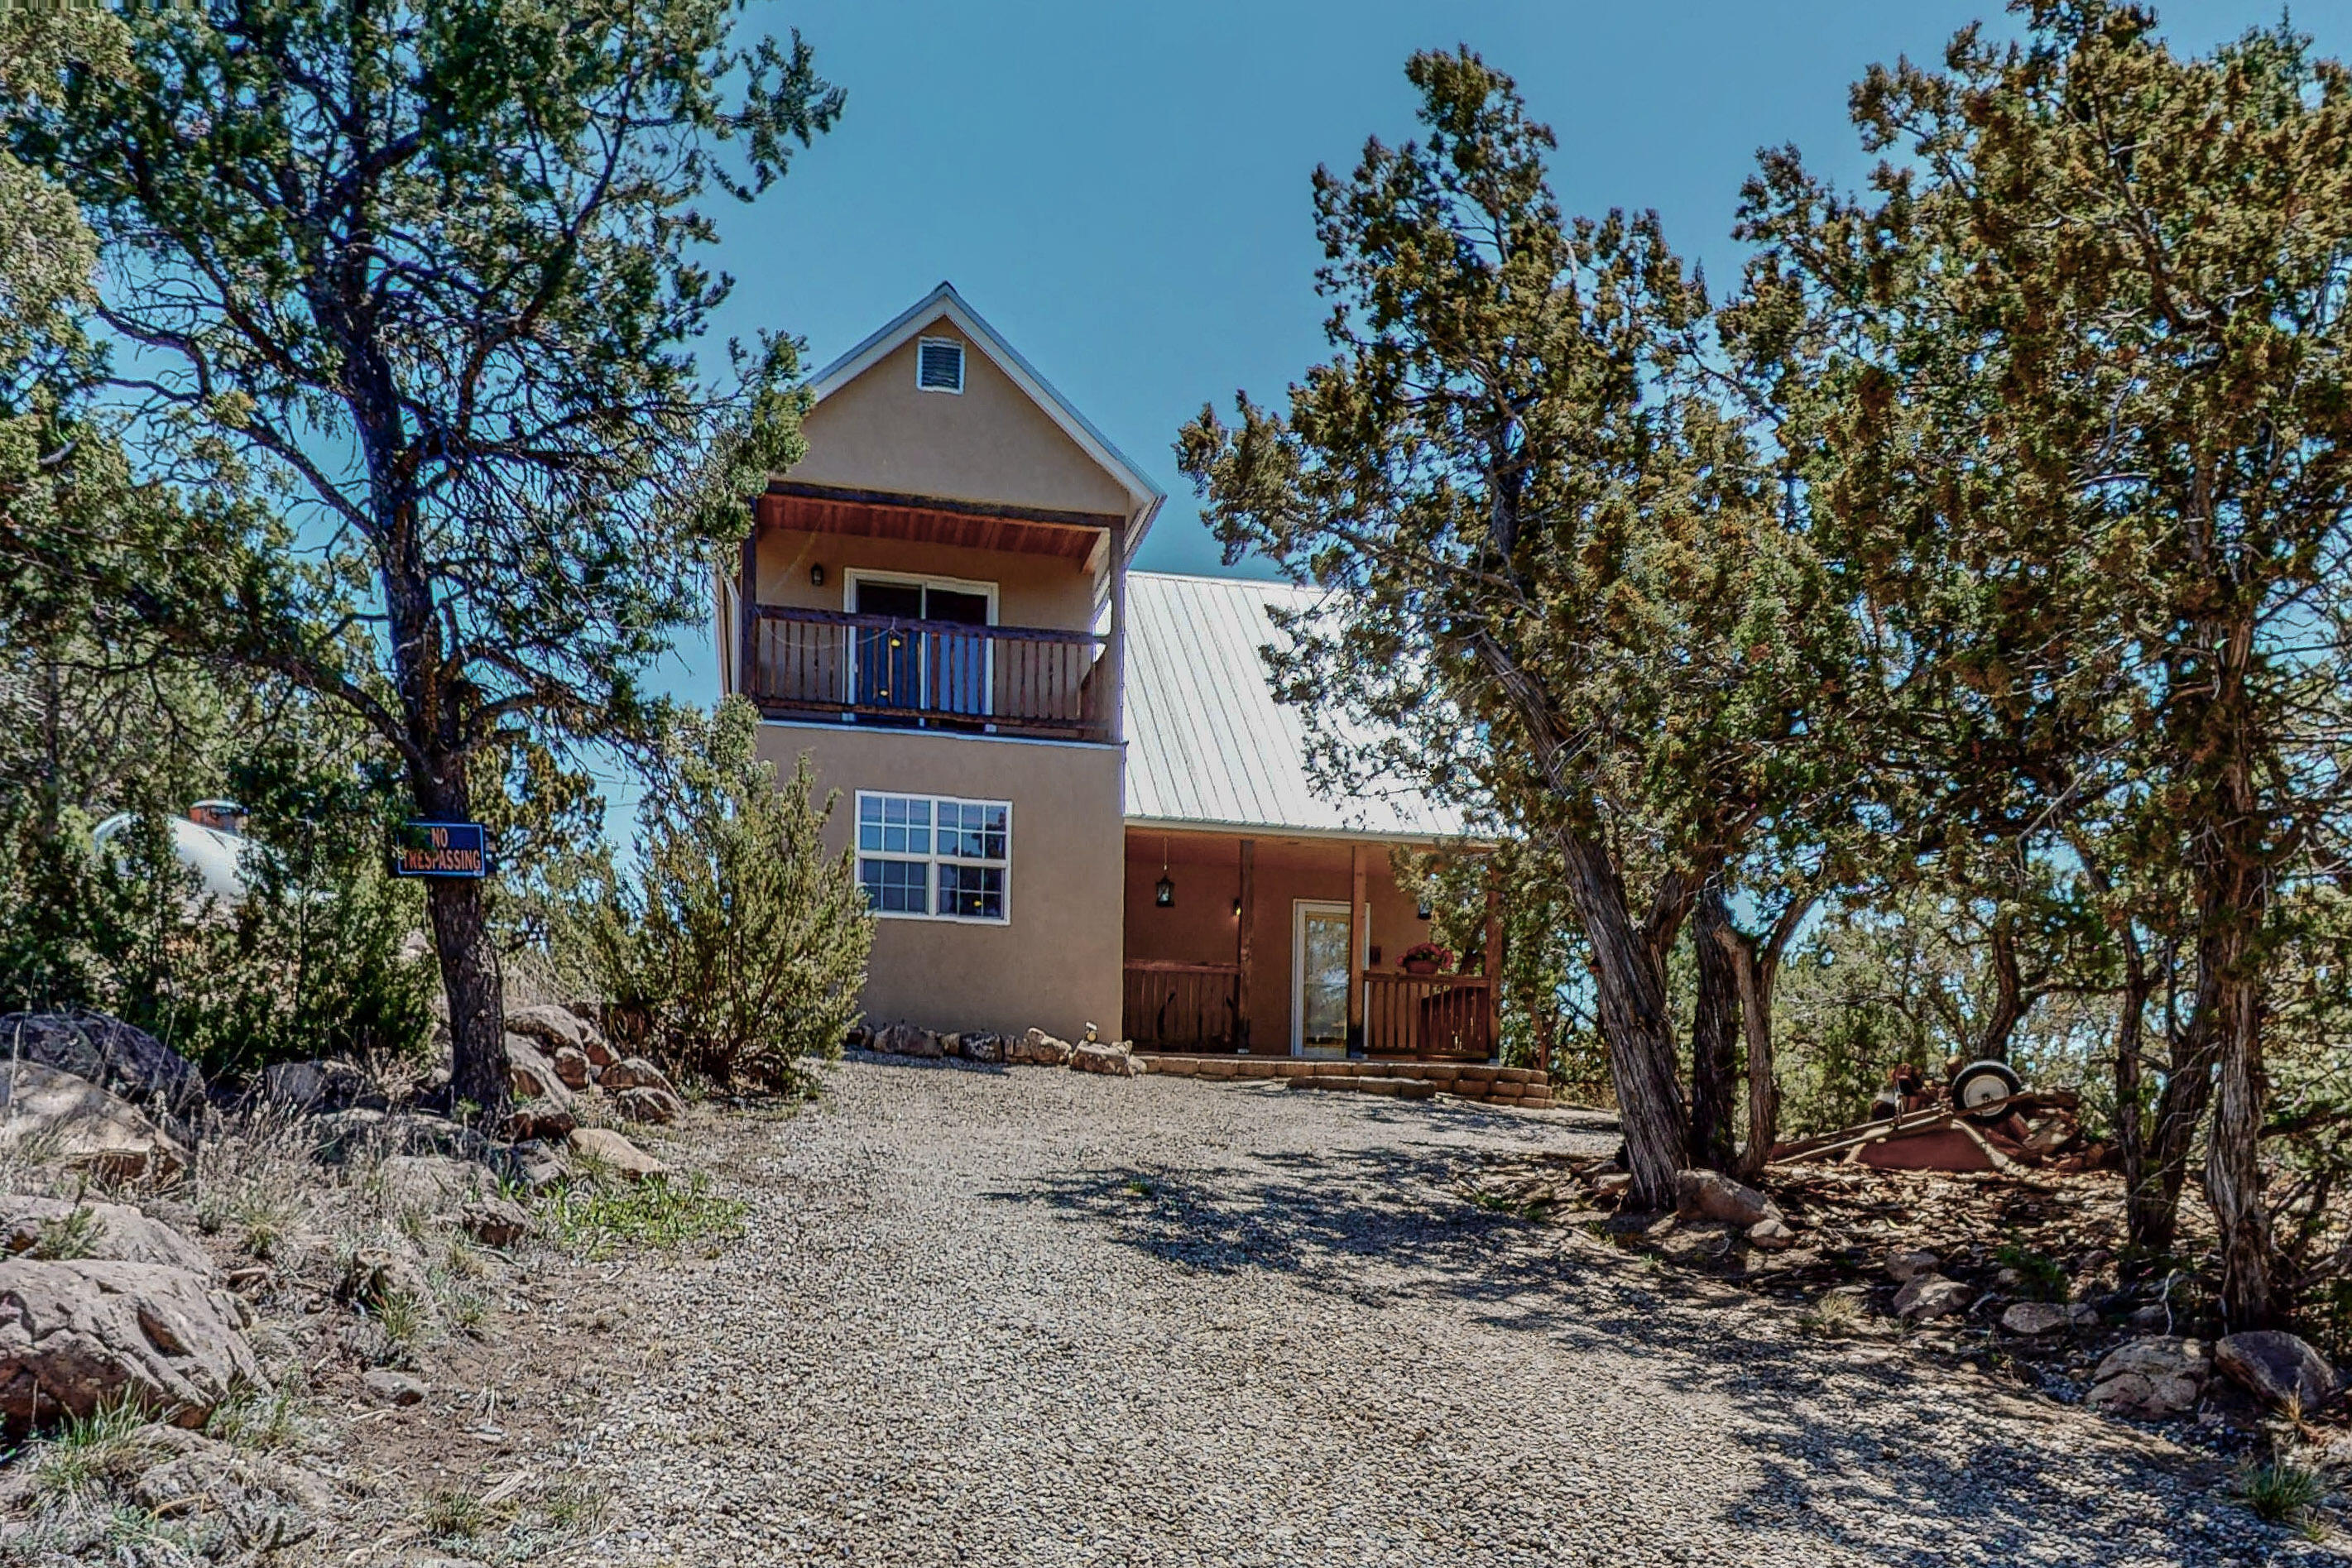 This beautiful custom home has views that cannot be beaten. Experience the peace of true mountain living less than 30 minutes from Albuquerque. The meticulously maintained northern New Mexico style home has two bedrooms, two full baths, high beamed ceilings, upgraded kitchen and bathroom countertops. The large master bedroom loft with a deck offers unsurpassed views and a walk-in closet. Other features include a pro panel roof, three split heating/air combo units, a wood-burning stove, radiant floor heat, outdoor storage shed, 20x20 detached garage,stucco 2020,new water lines, new advanced septic prior to closing & community water system. An additional .47 acre lot adjacent to the home can be purchased separately.(#385 Darby Lane).See MLS 1015393. Do not lock the security door in the back.